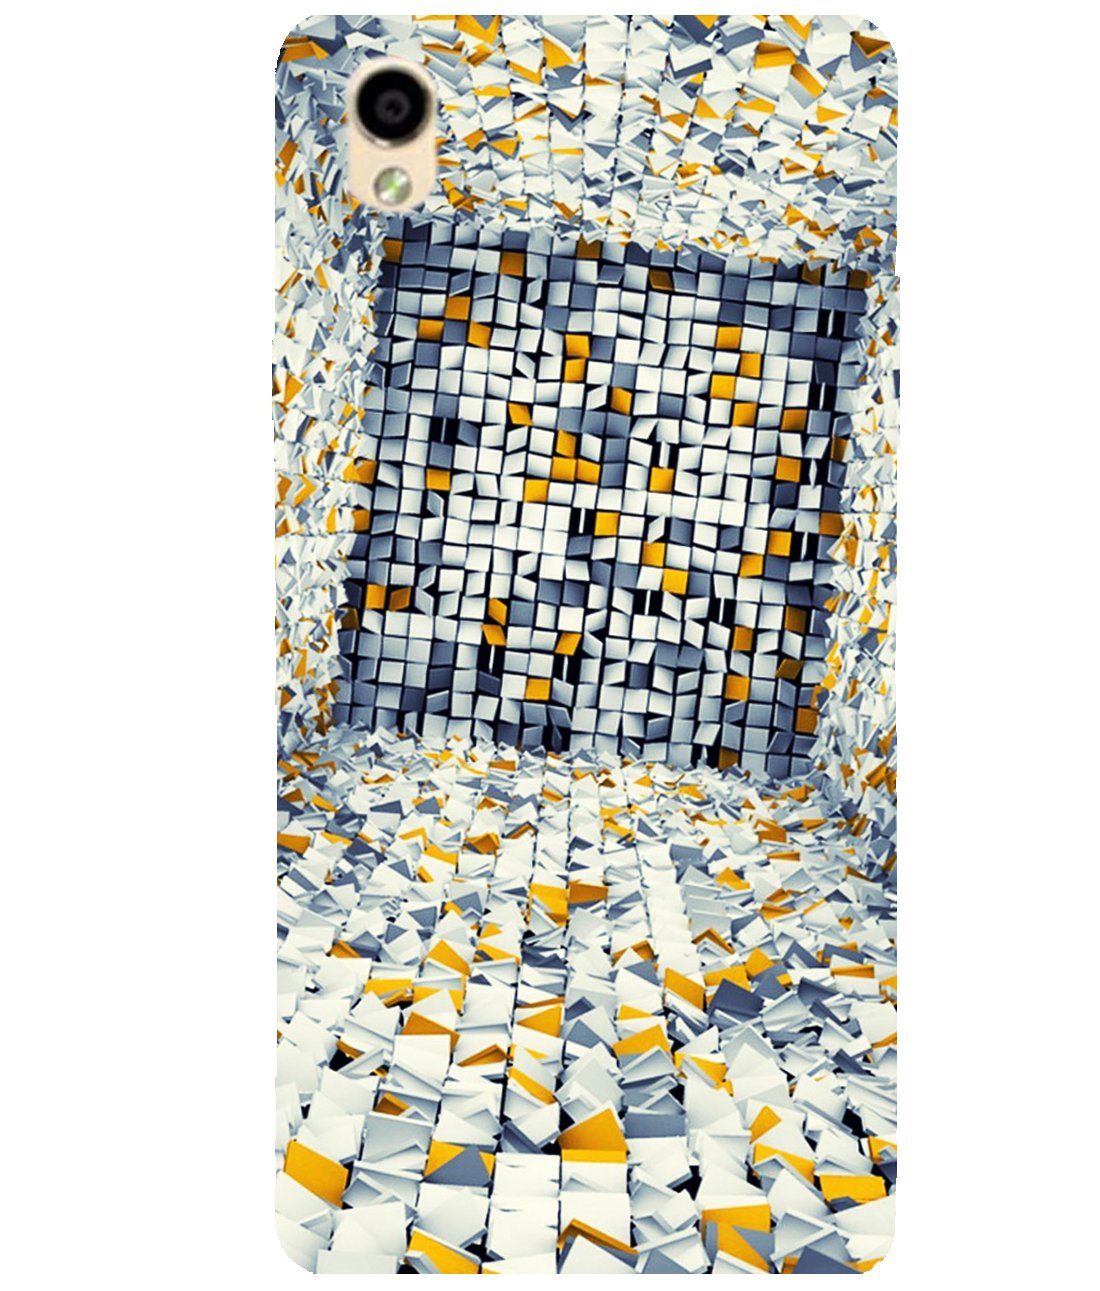 Csk White Gray And Yellow 3d Wallpaper Mobile Case - Mobile Phone , HD Wallpaper & Backgrounds